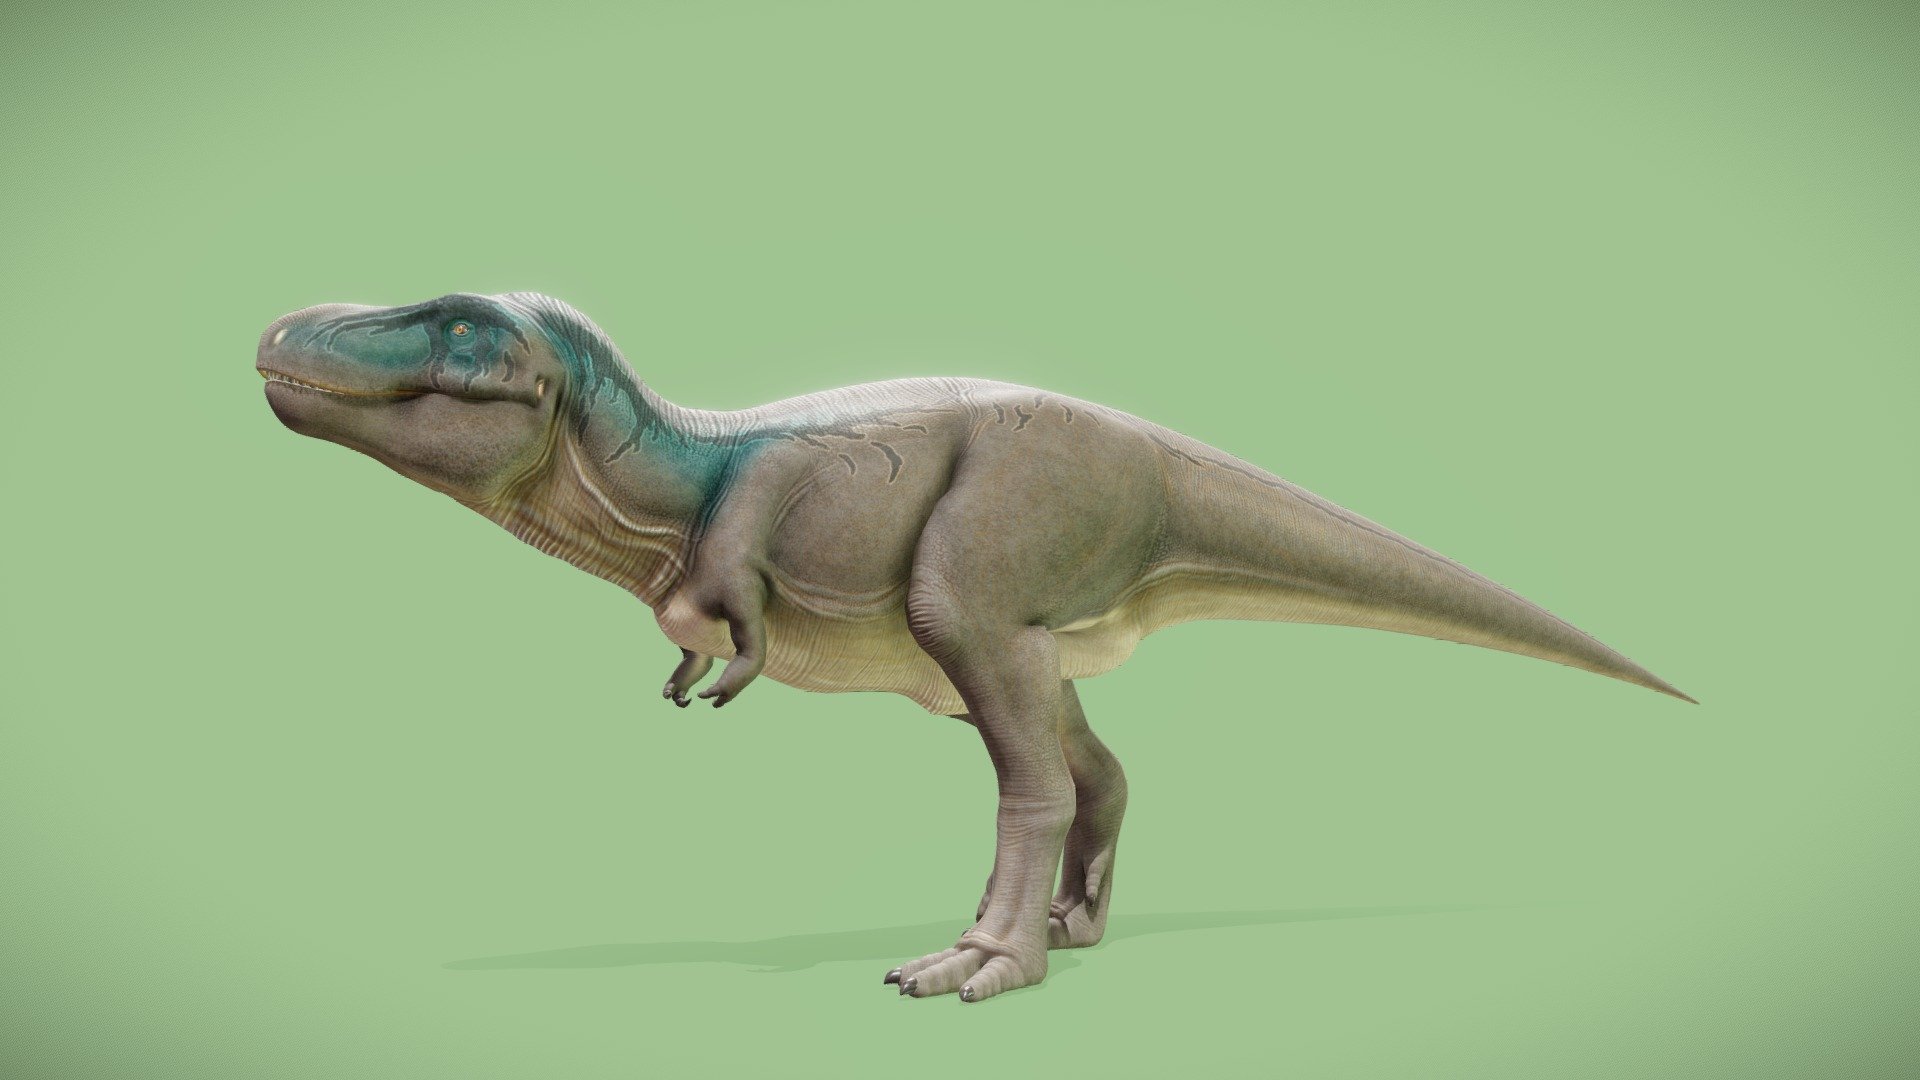 Here an another T-Rex I've made with Blender, a version of the dinosaur with &ldquo;lips